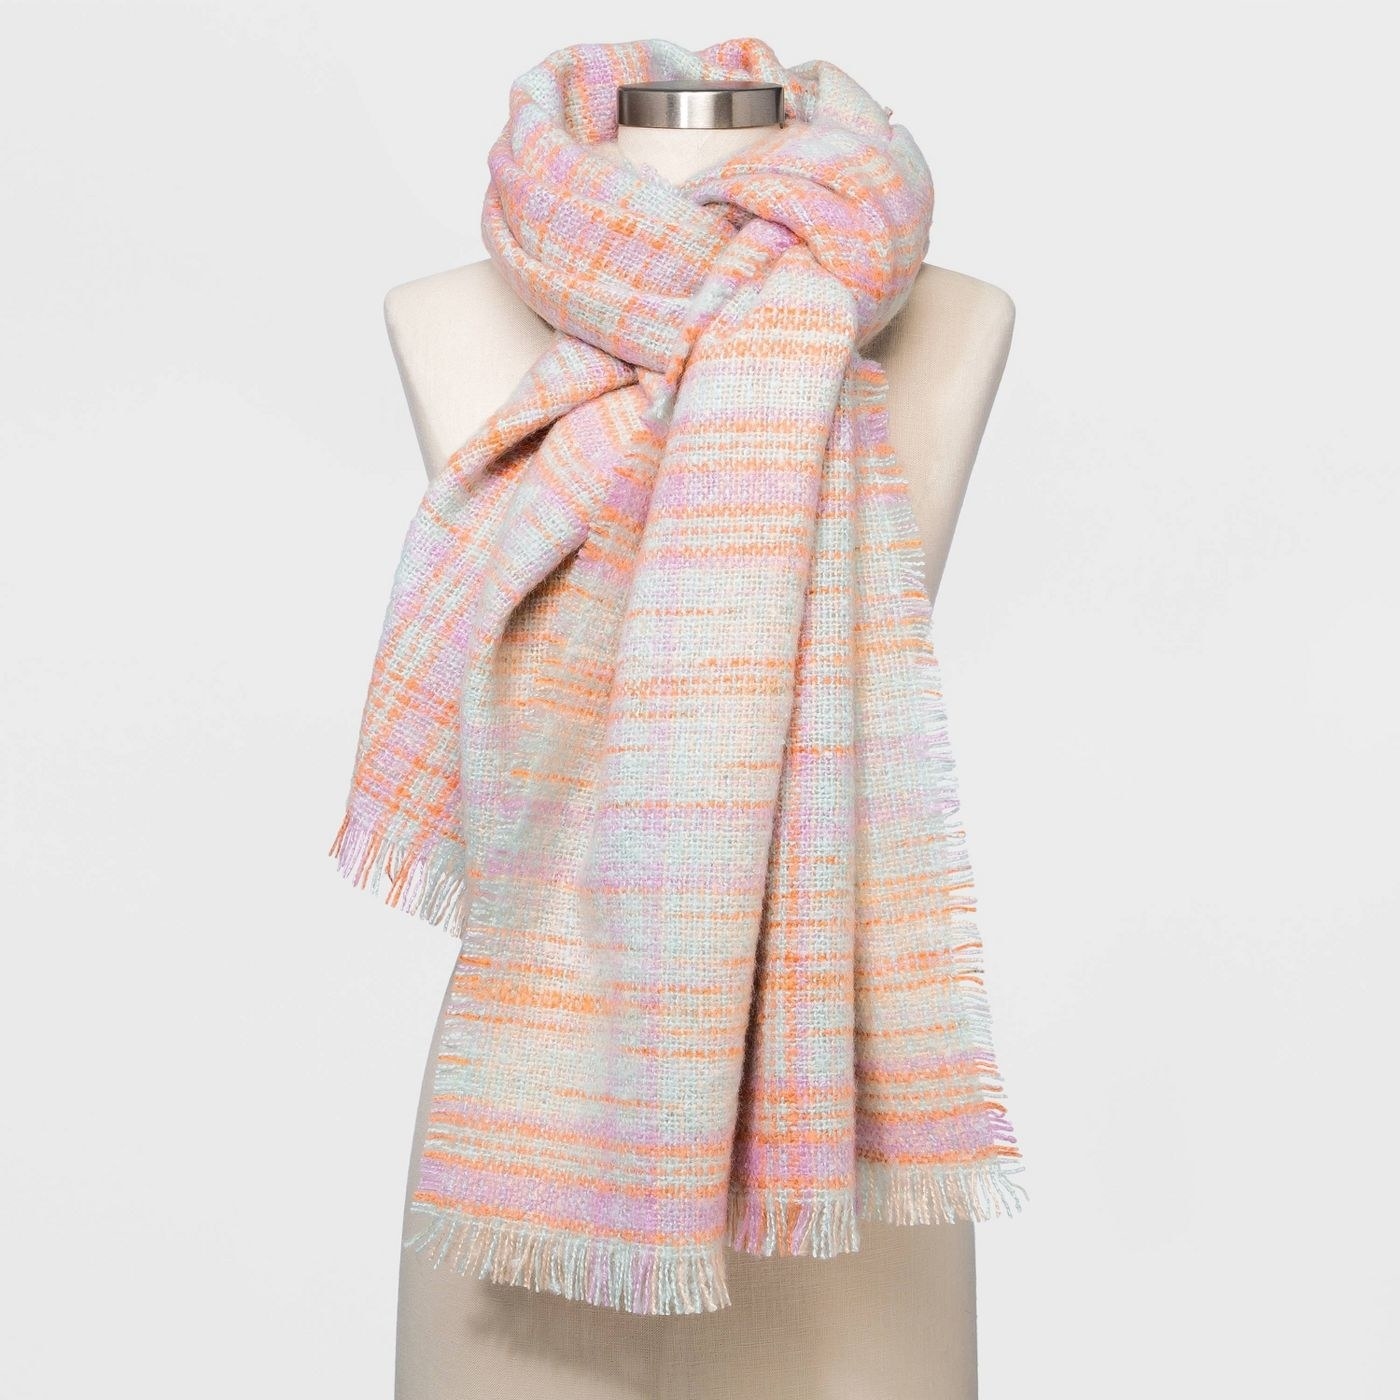 A pastel pink and orange scarf on a mannequin